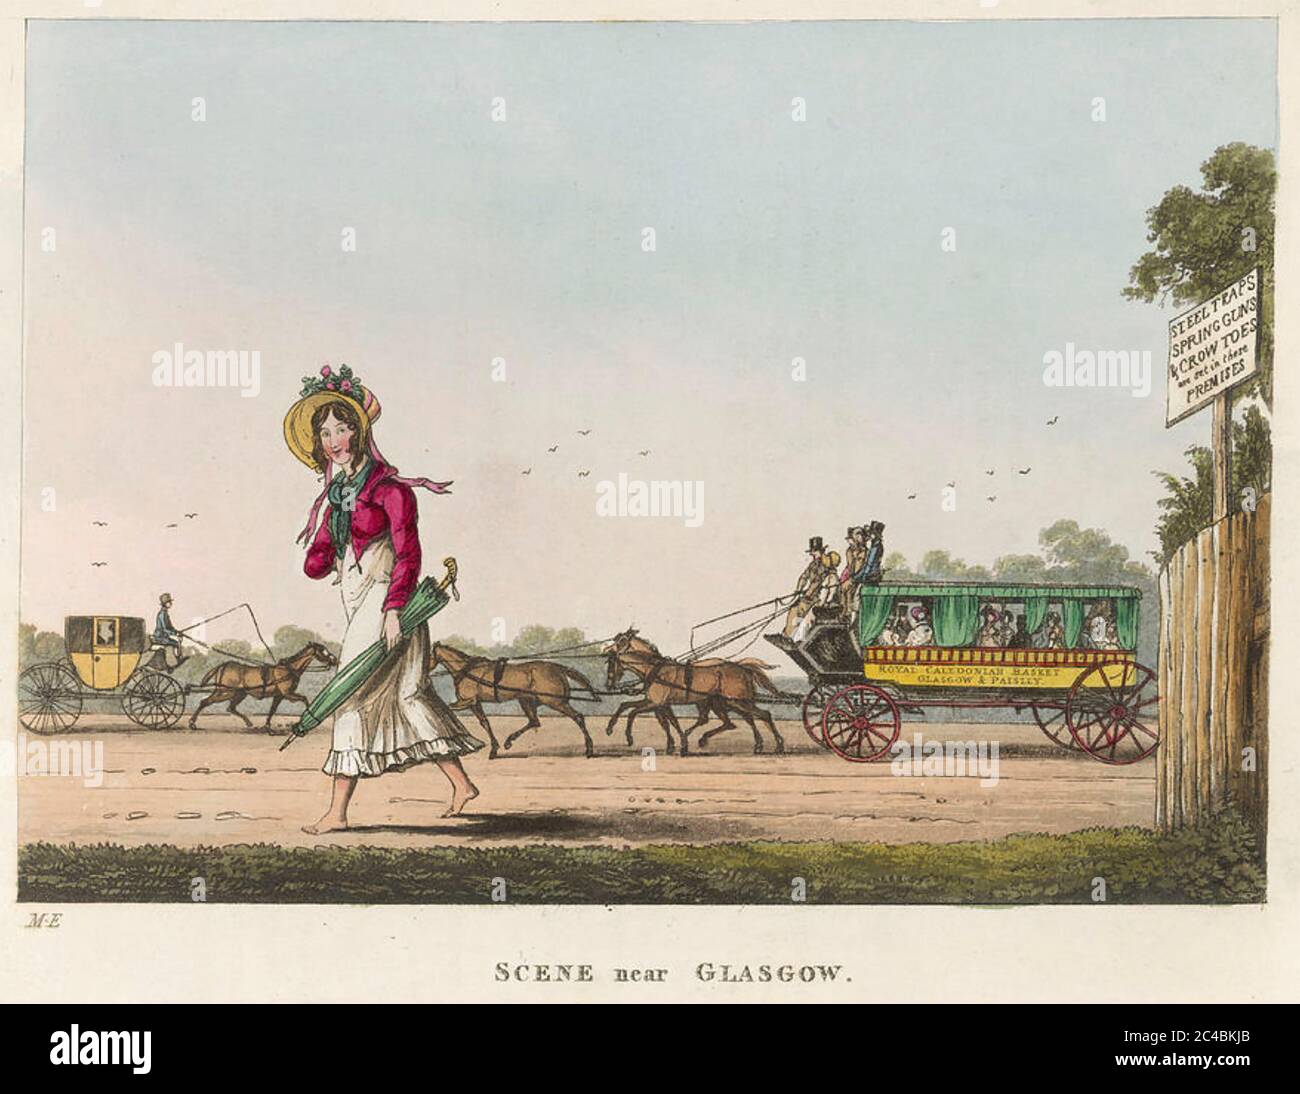 ROYAL CALEDONIAN BASKET stagecoach operating between Glasgow and Paisley in an 1825 engraving. The notice on the fence at right is a warning against trespassers. Oddly, the lady walker is barefoot. Stock Photo